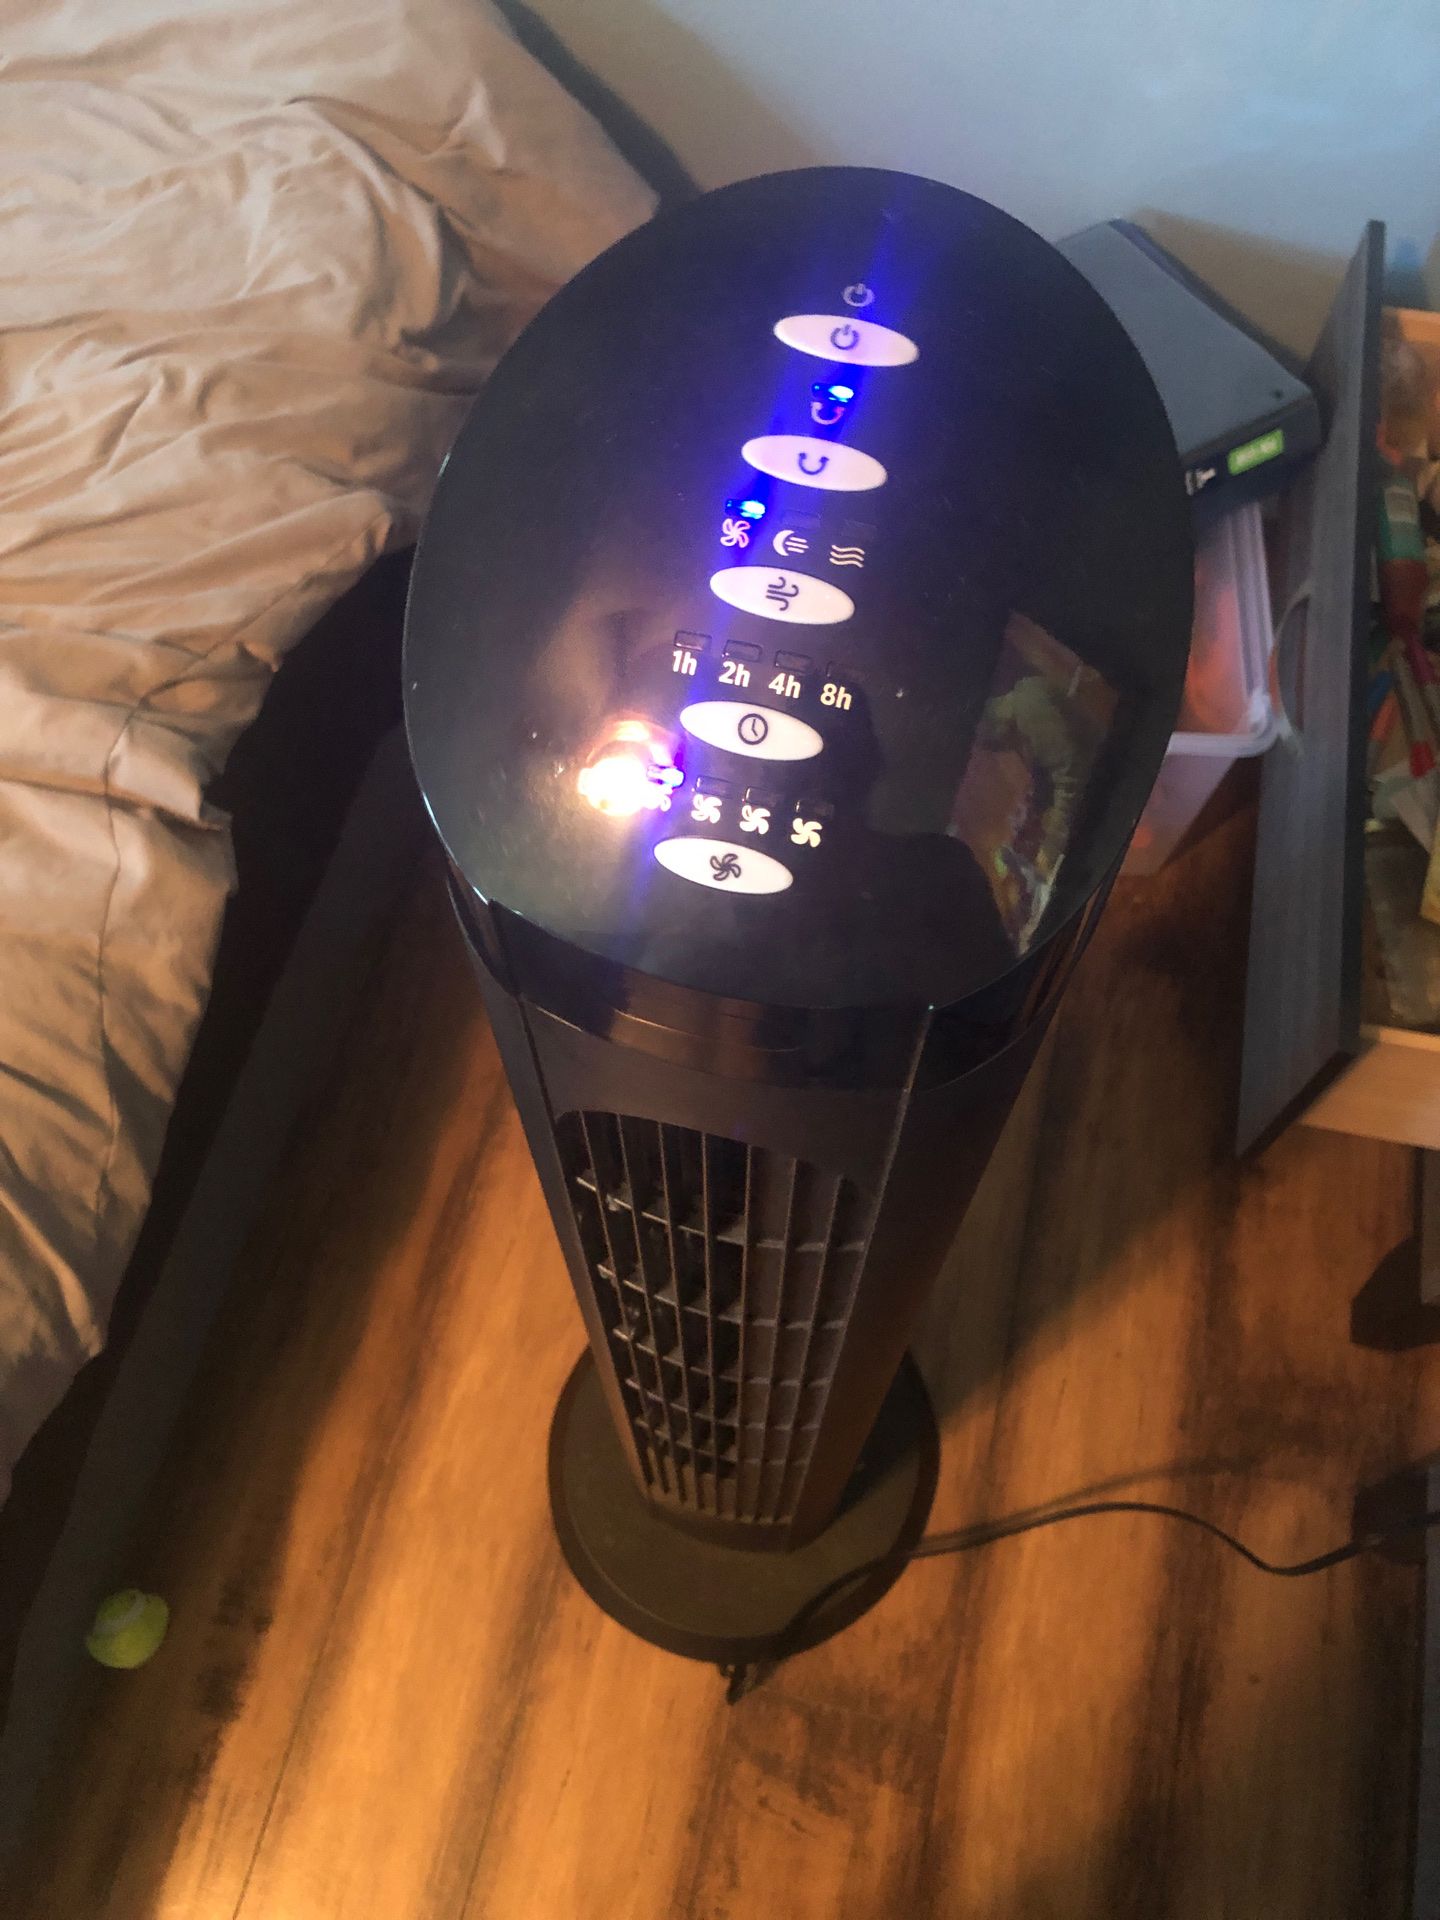 Nice Tower fan /air cooler with remote